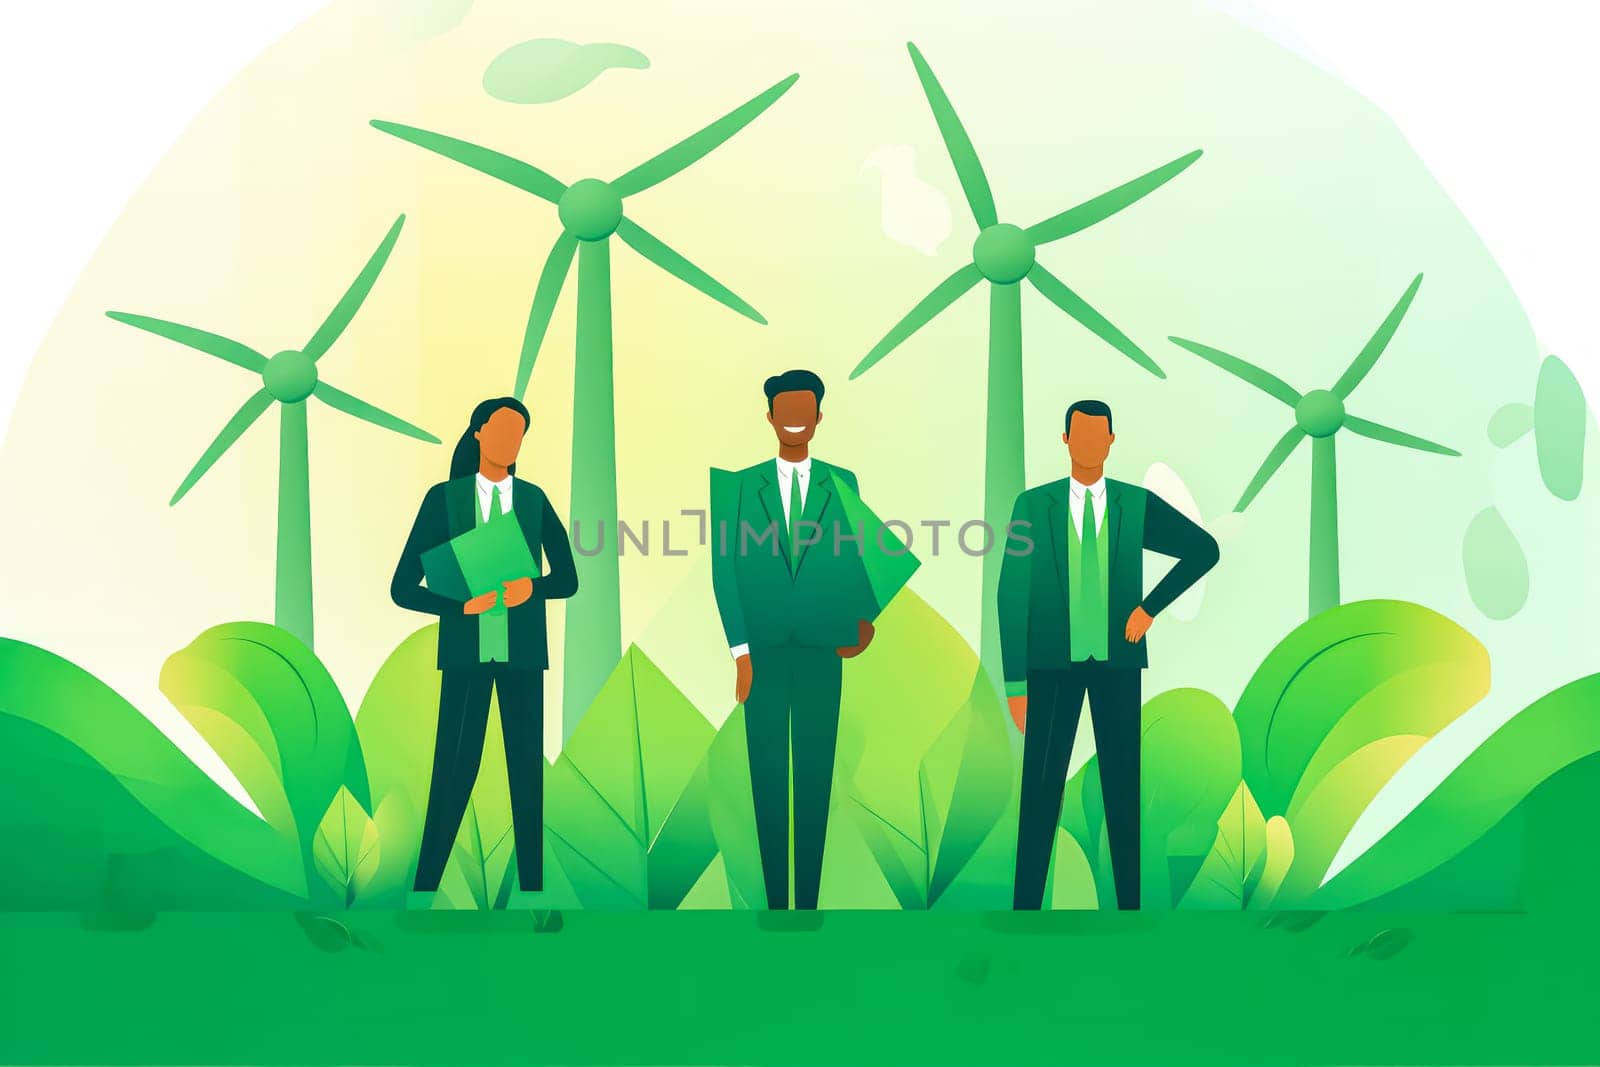 illustration of men and women making sustainable, eco friendly lifestyle choices recycling, growing plants, using renewable energy sources. Standard visual concept.